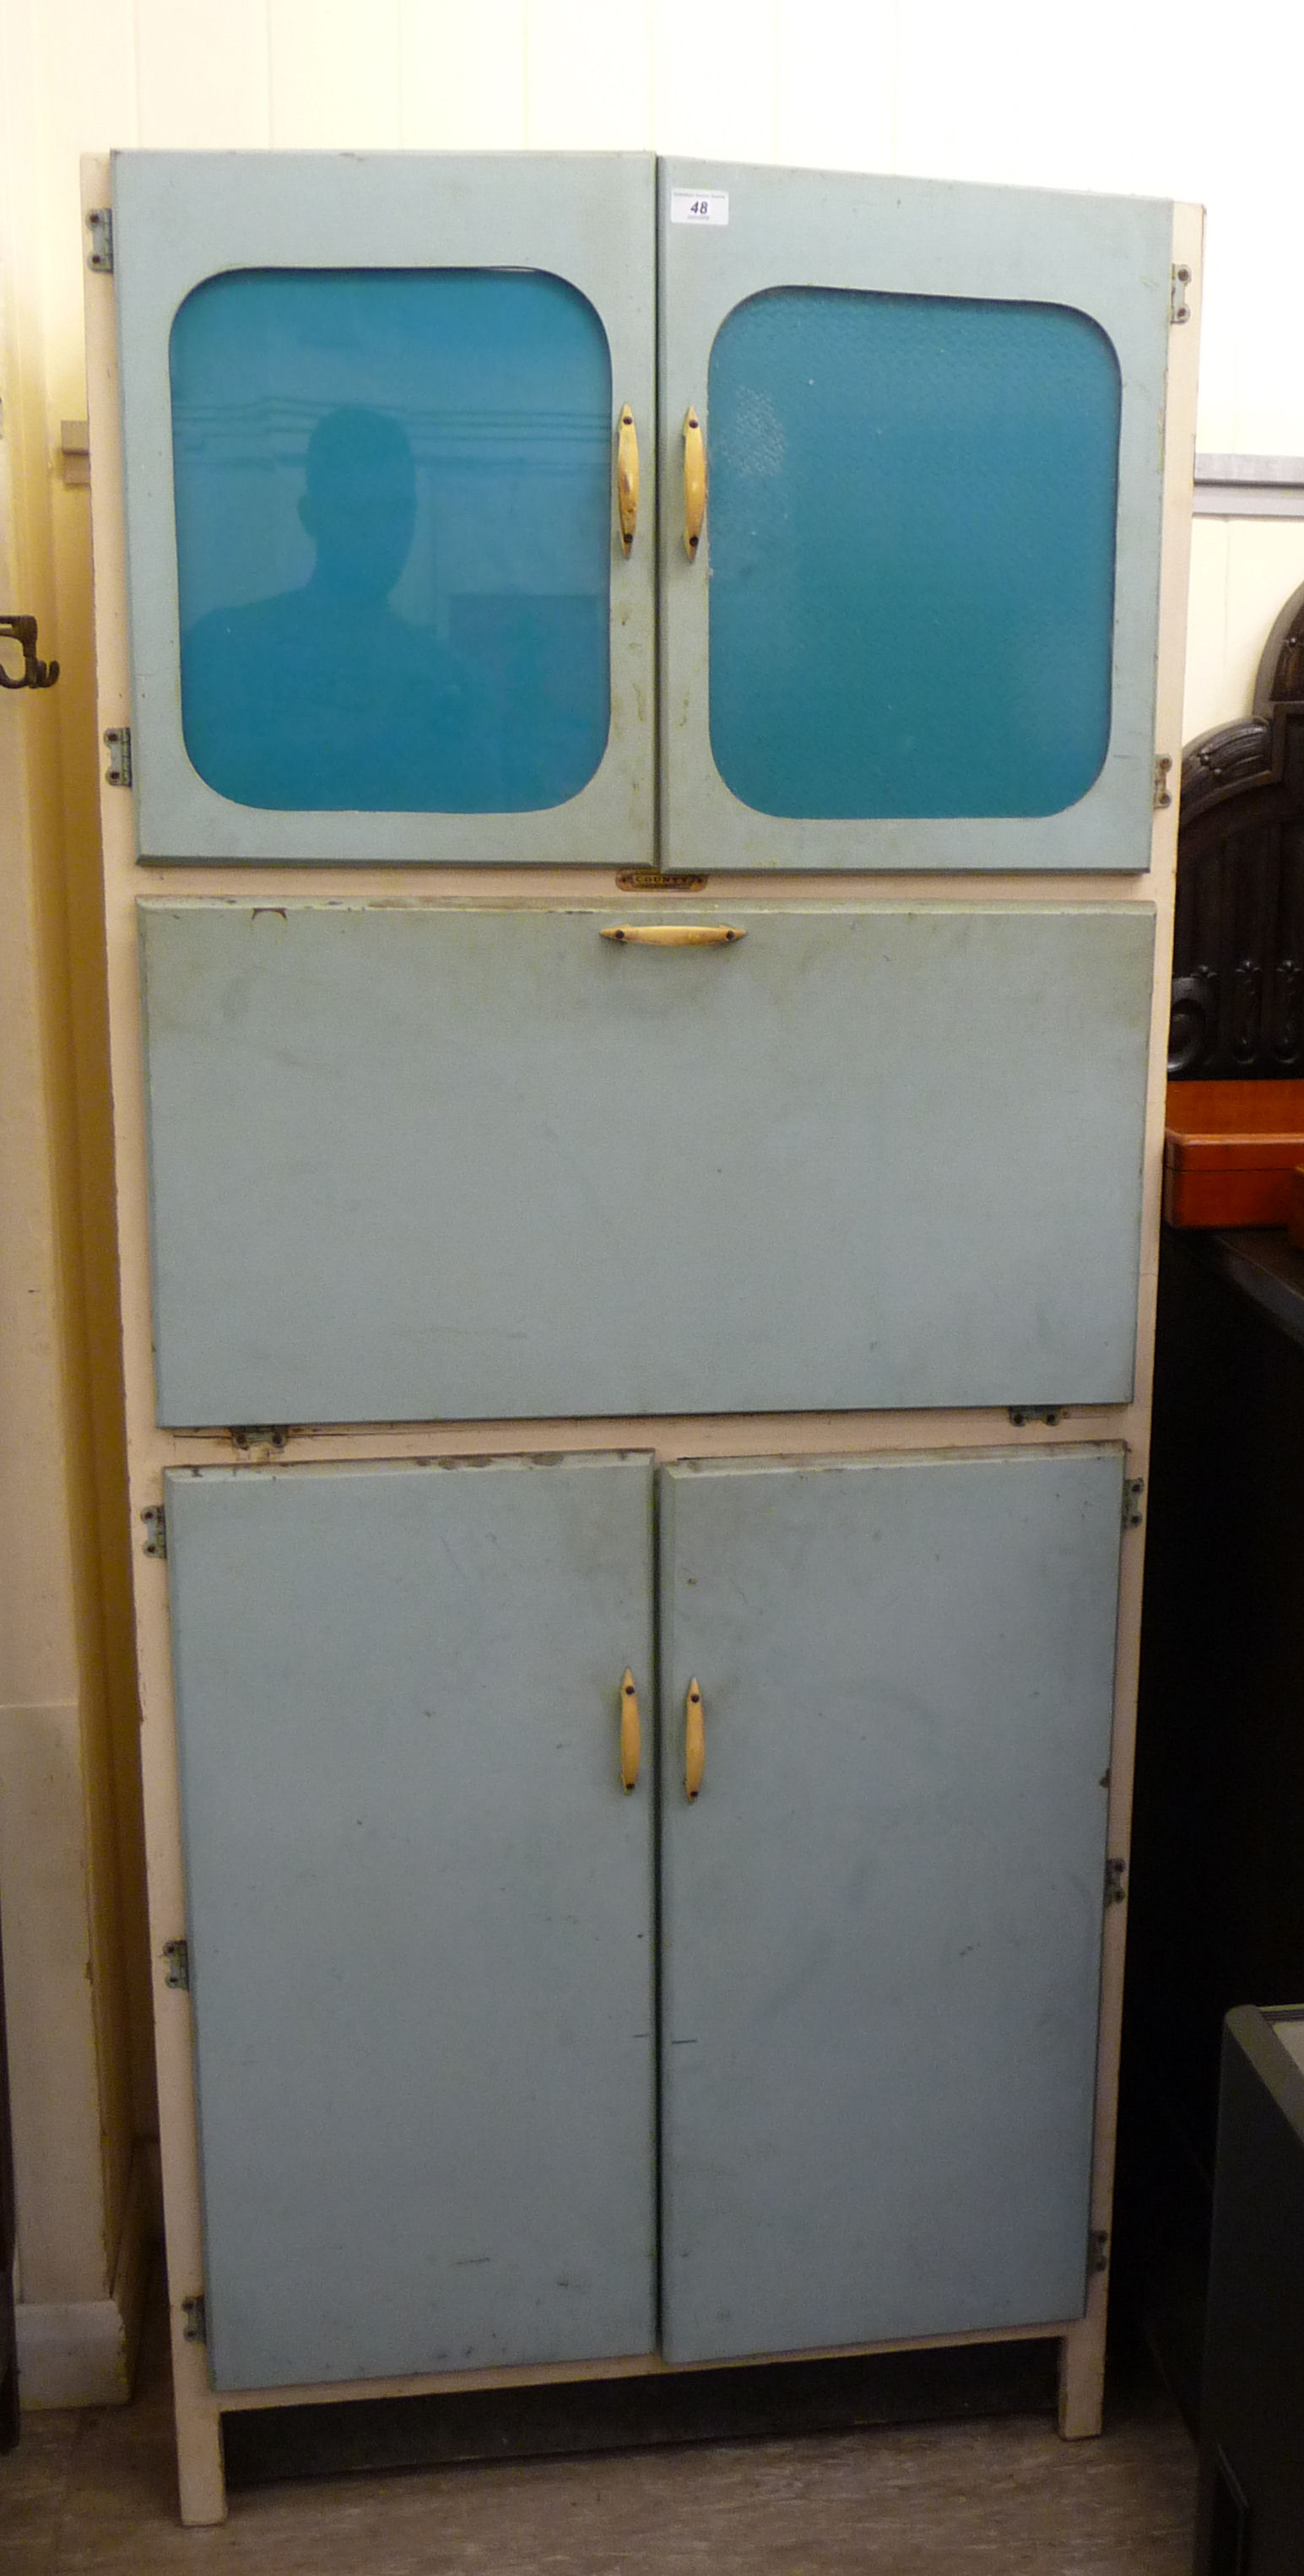 A 1950s blue painted wooden kitchen cabinet,